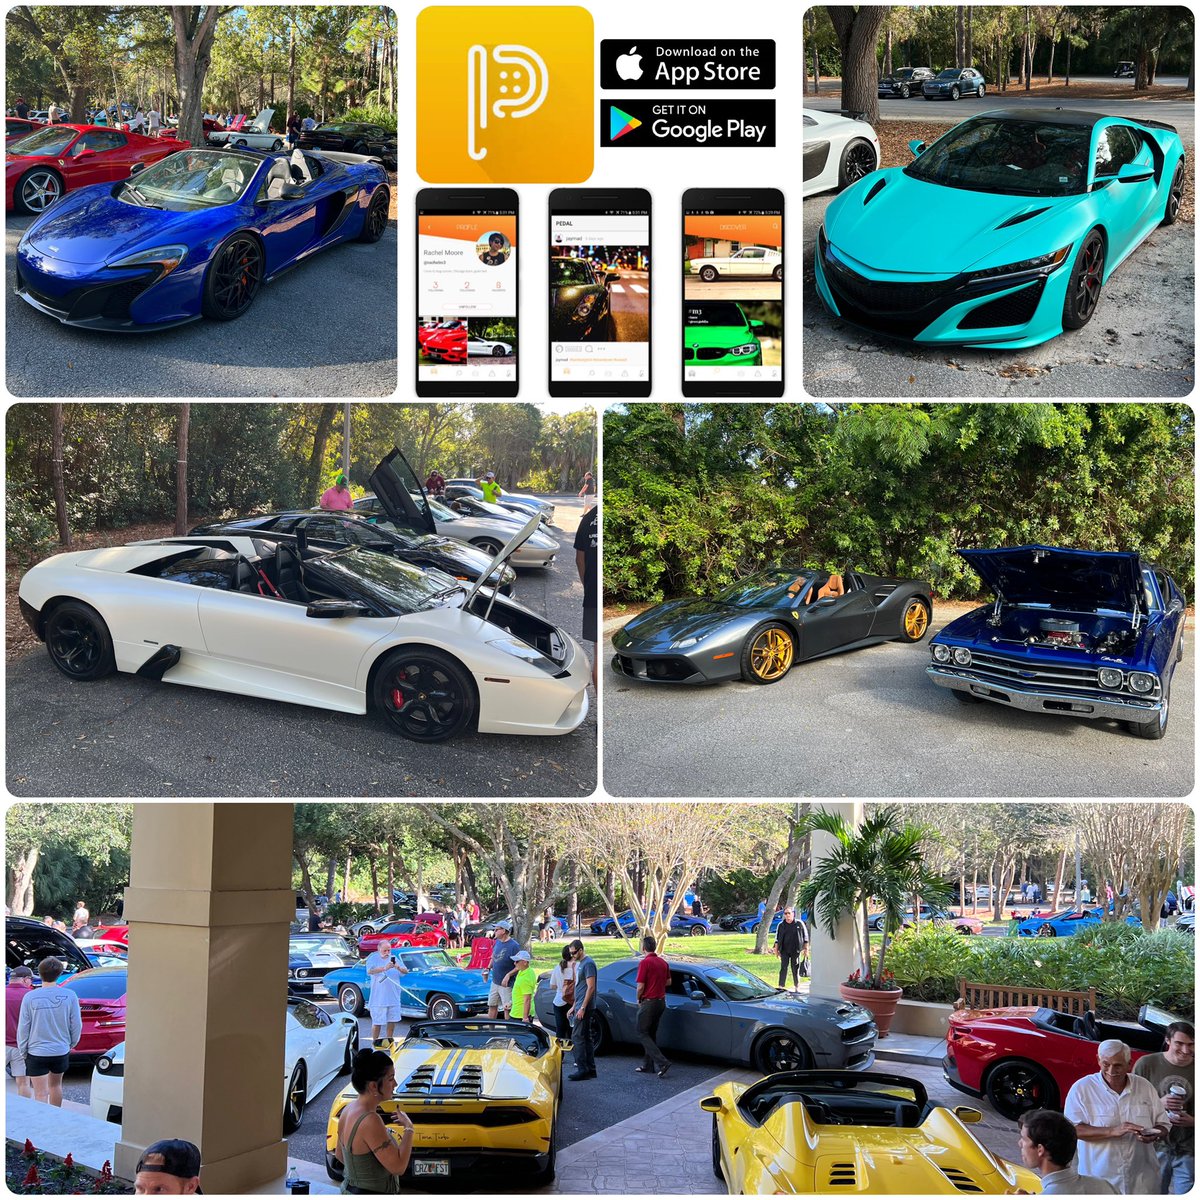 🔶 Cars & Coffee at Innisbrook Resort presented by Ferrari of Tampa Bay
🔶 Get PEDAL - Free in app stores
🔶 PEDAL is a free, must have automotive enthusiast picture & video sharing app

#carsandcoffee #innisbrookresort #ferrarioftampabay